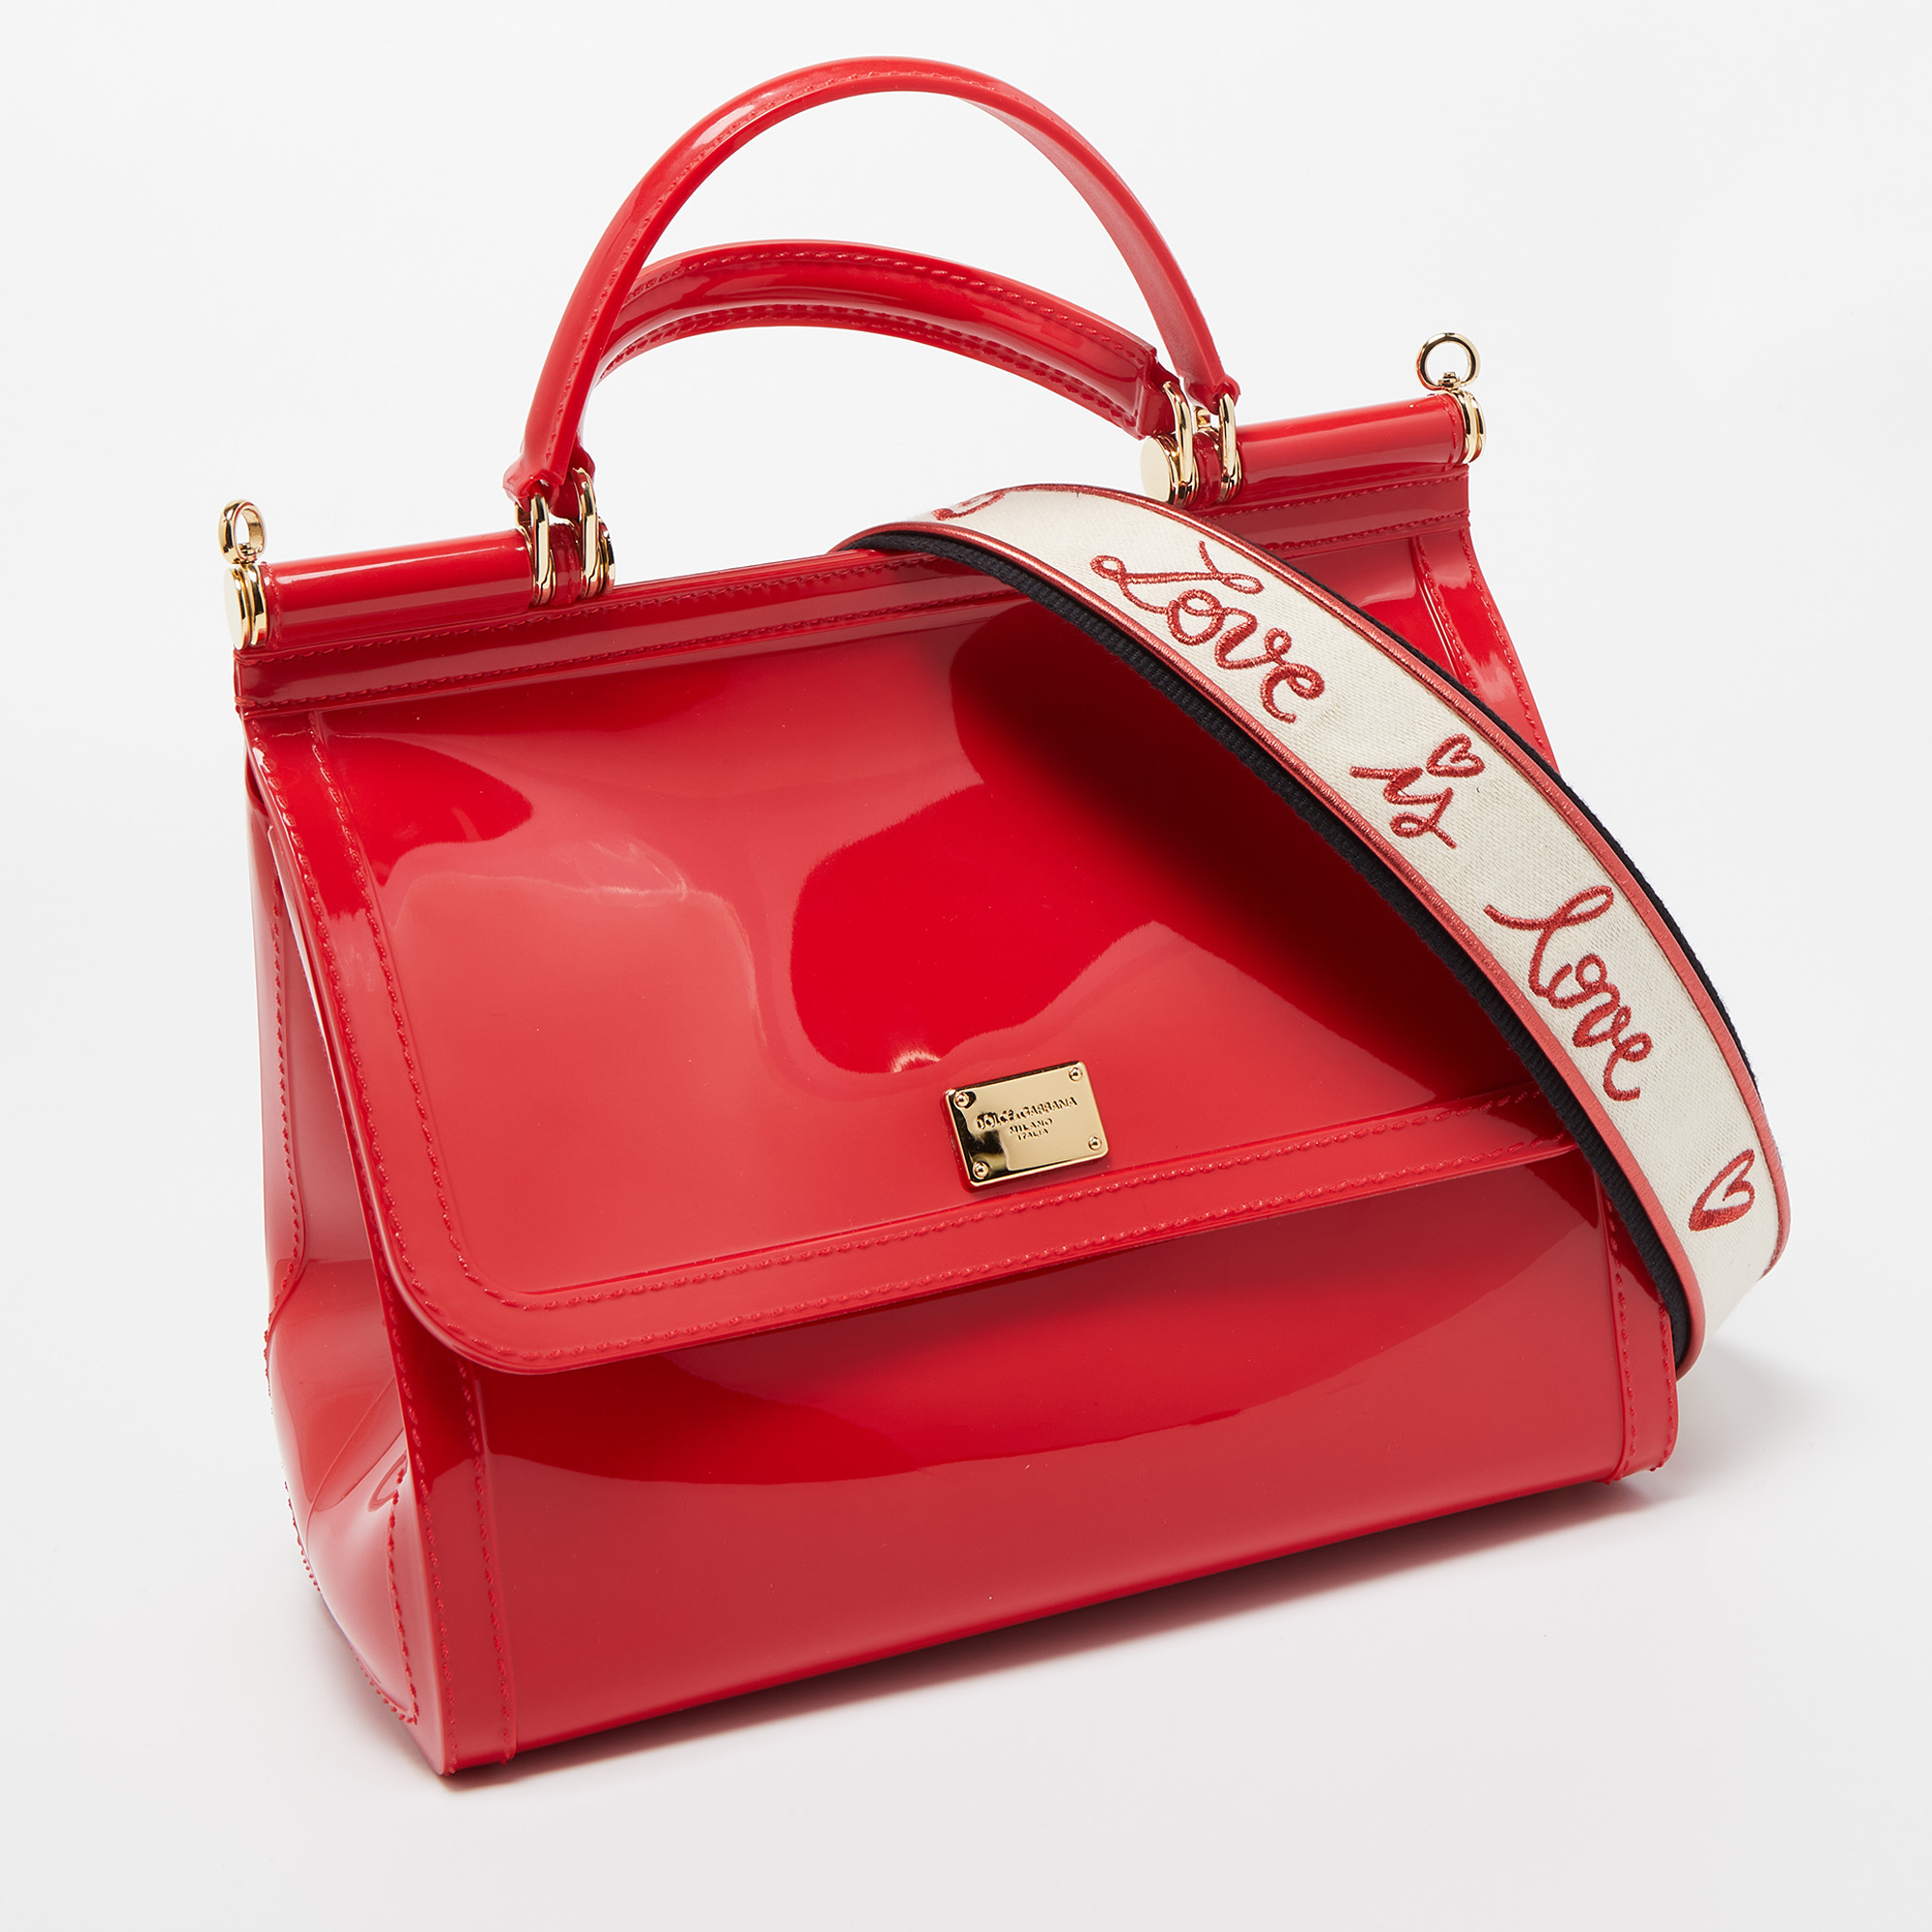 Dolce & Gabbana Red Rubber Miss Sicily Top Handle Bag